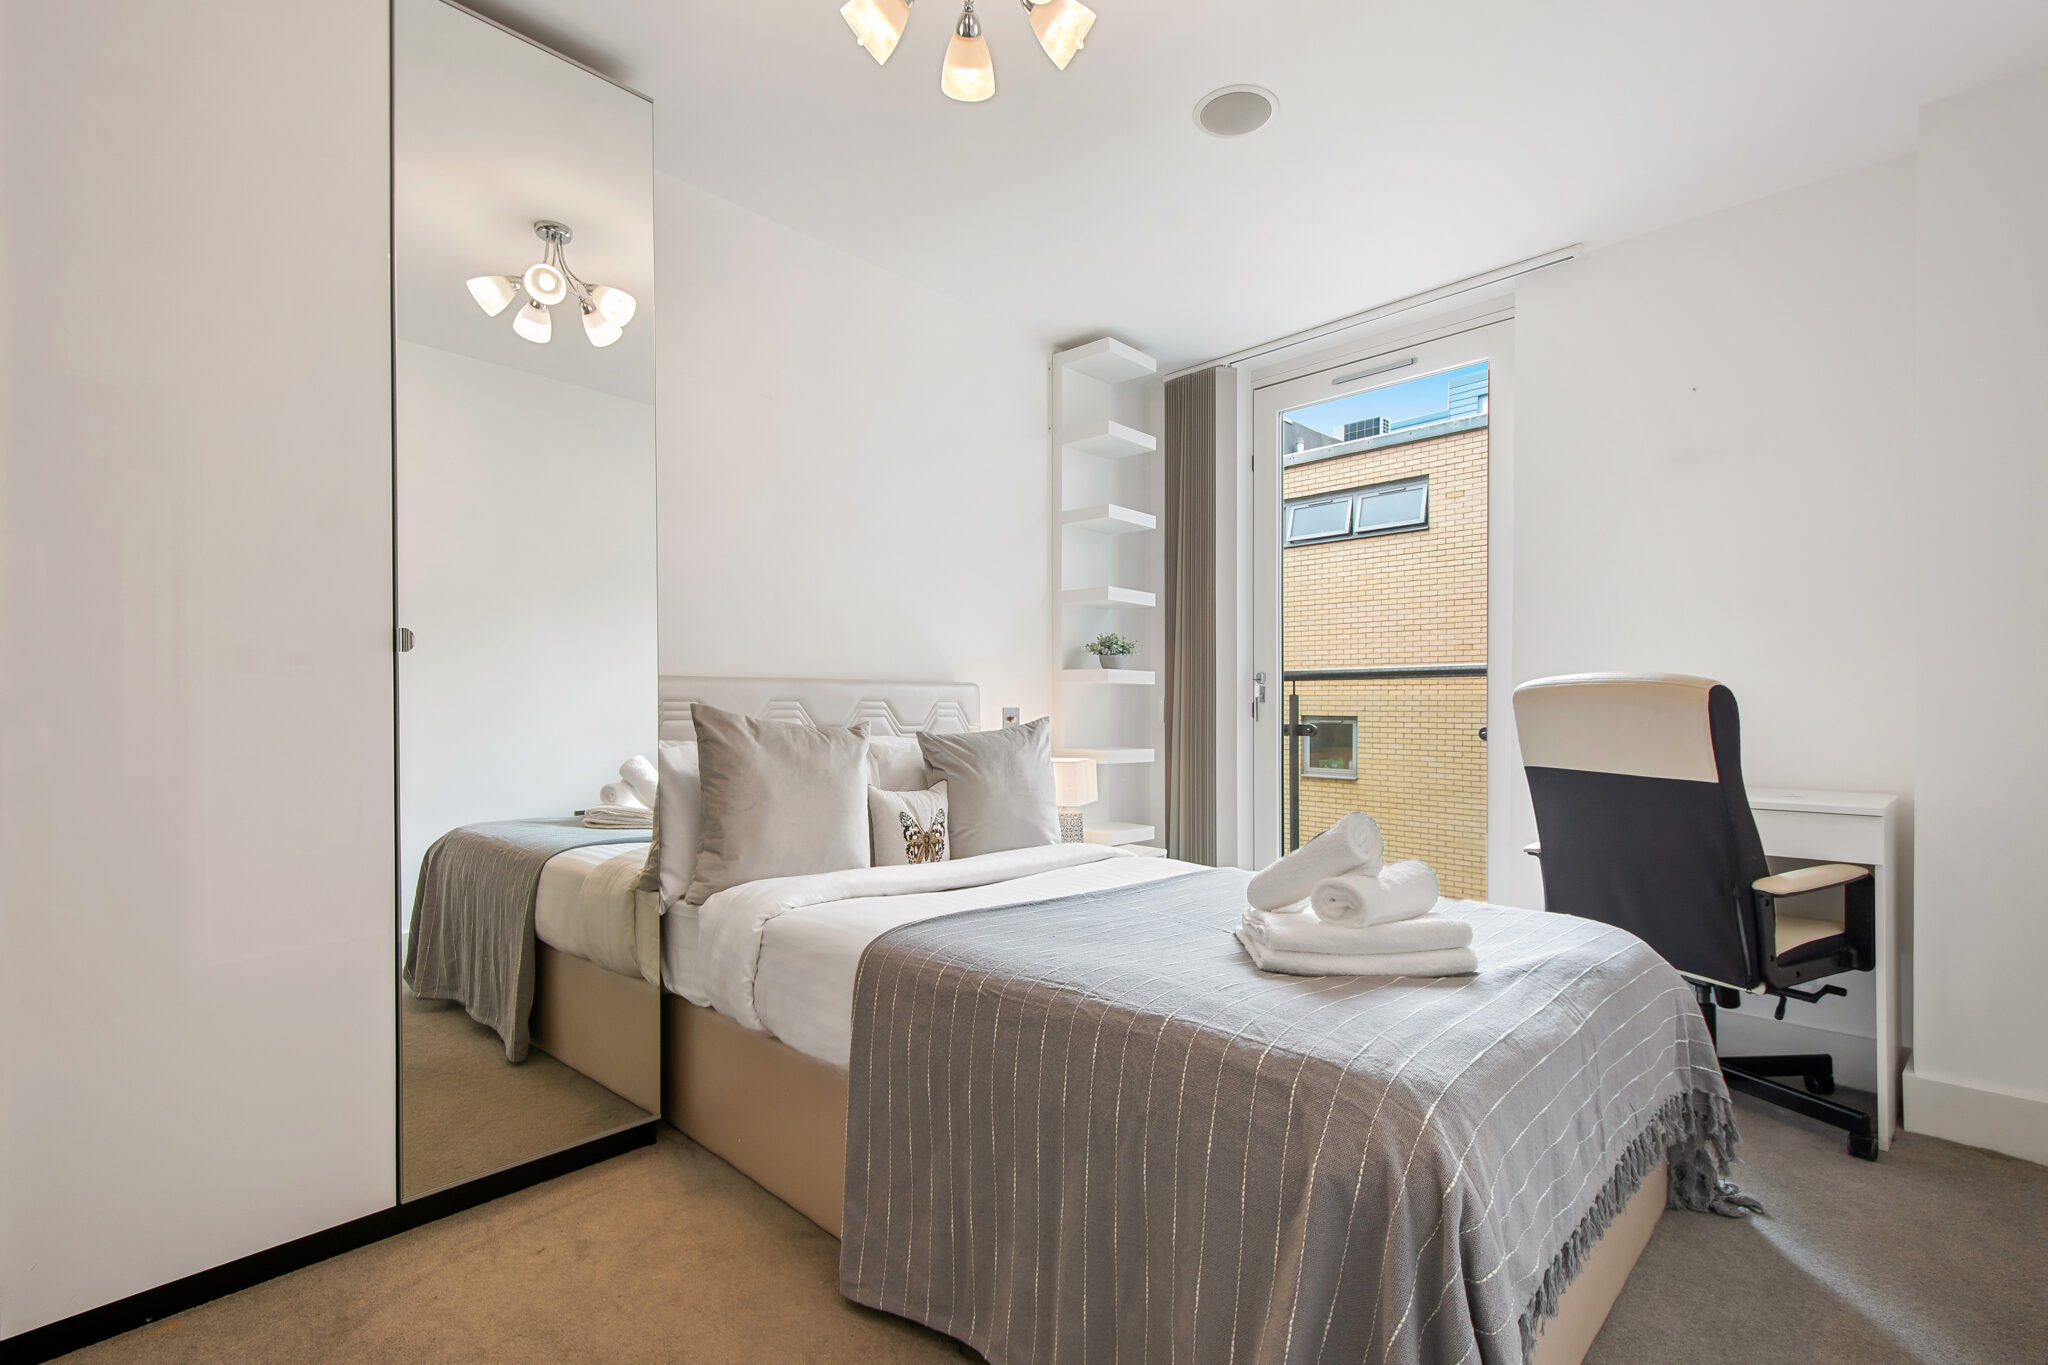 Discover-the-Perfect-Hotel-Alternative-with-our-Serviced-Apartments-at-Old-Street-Station.-Book-a-London-City-Centre-Location-at-Low-Cost!-Urban-Stay